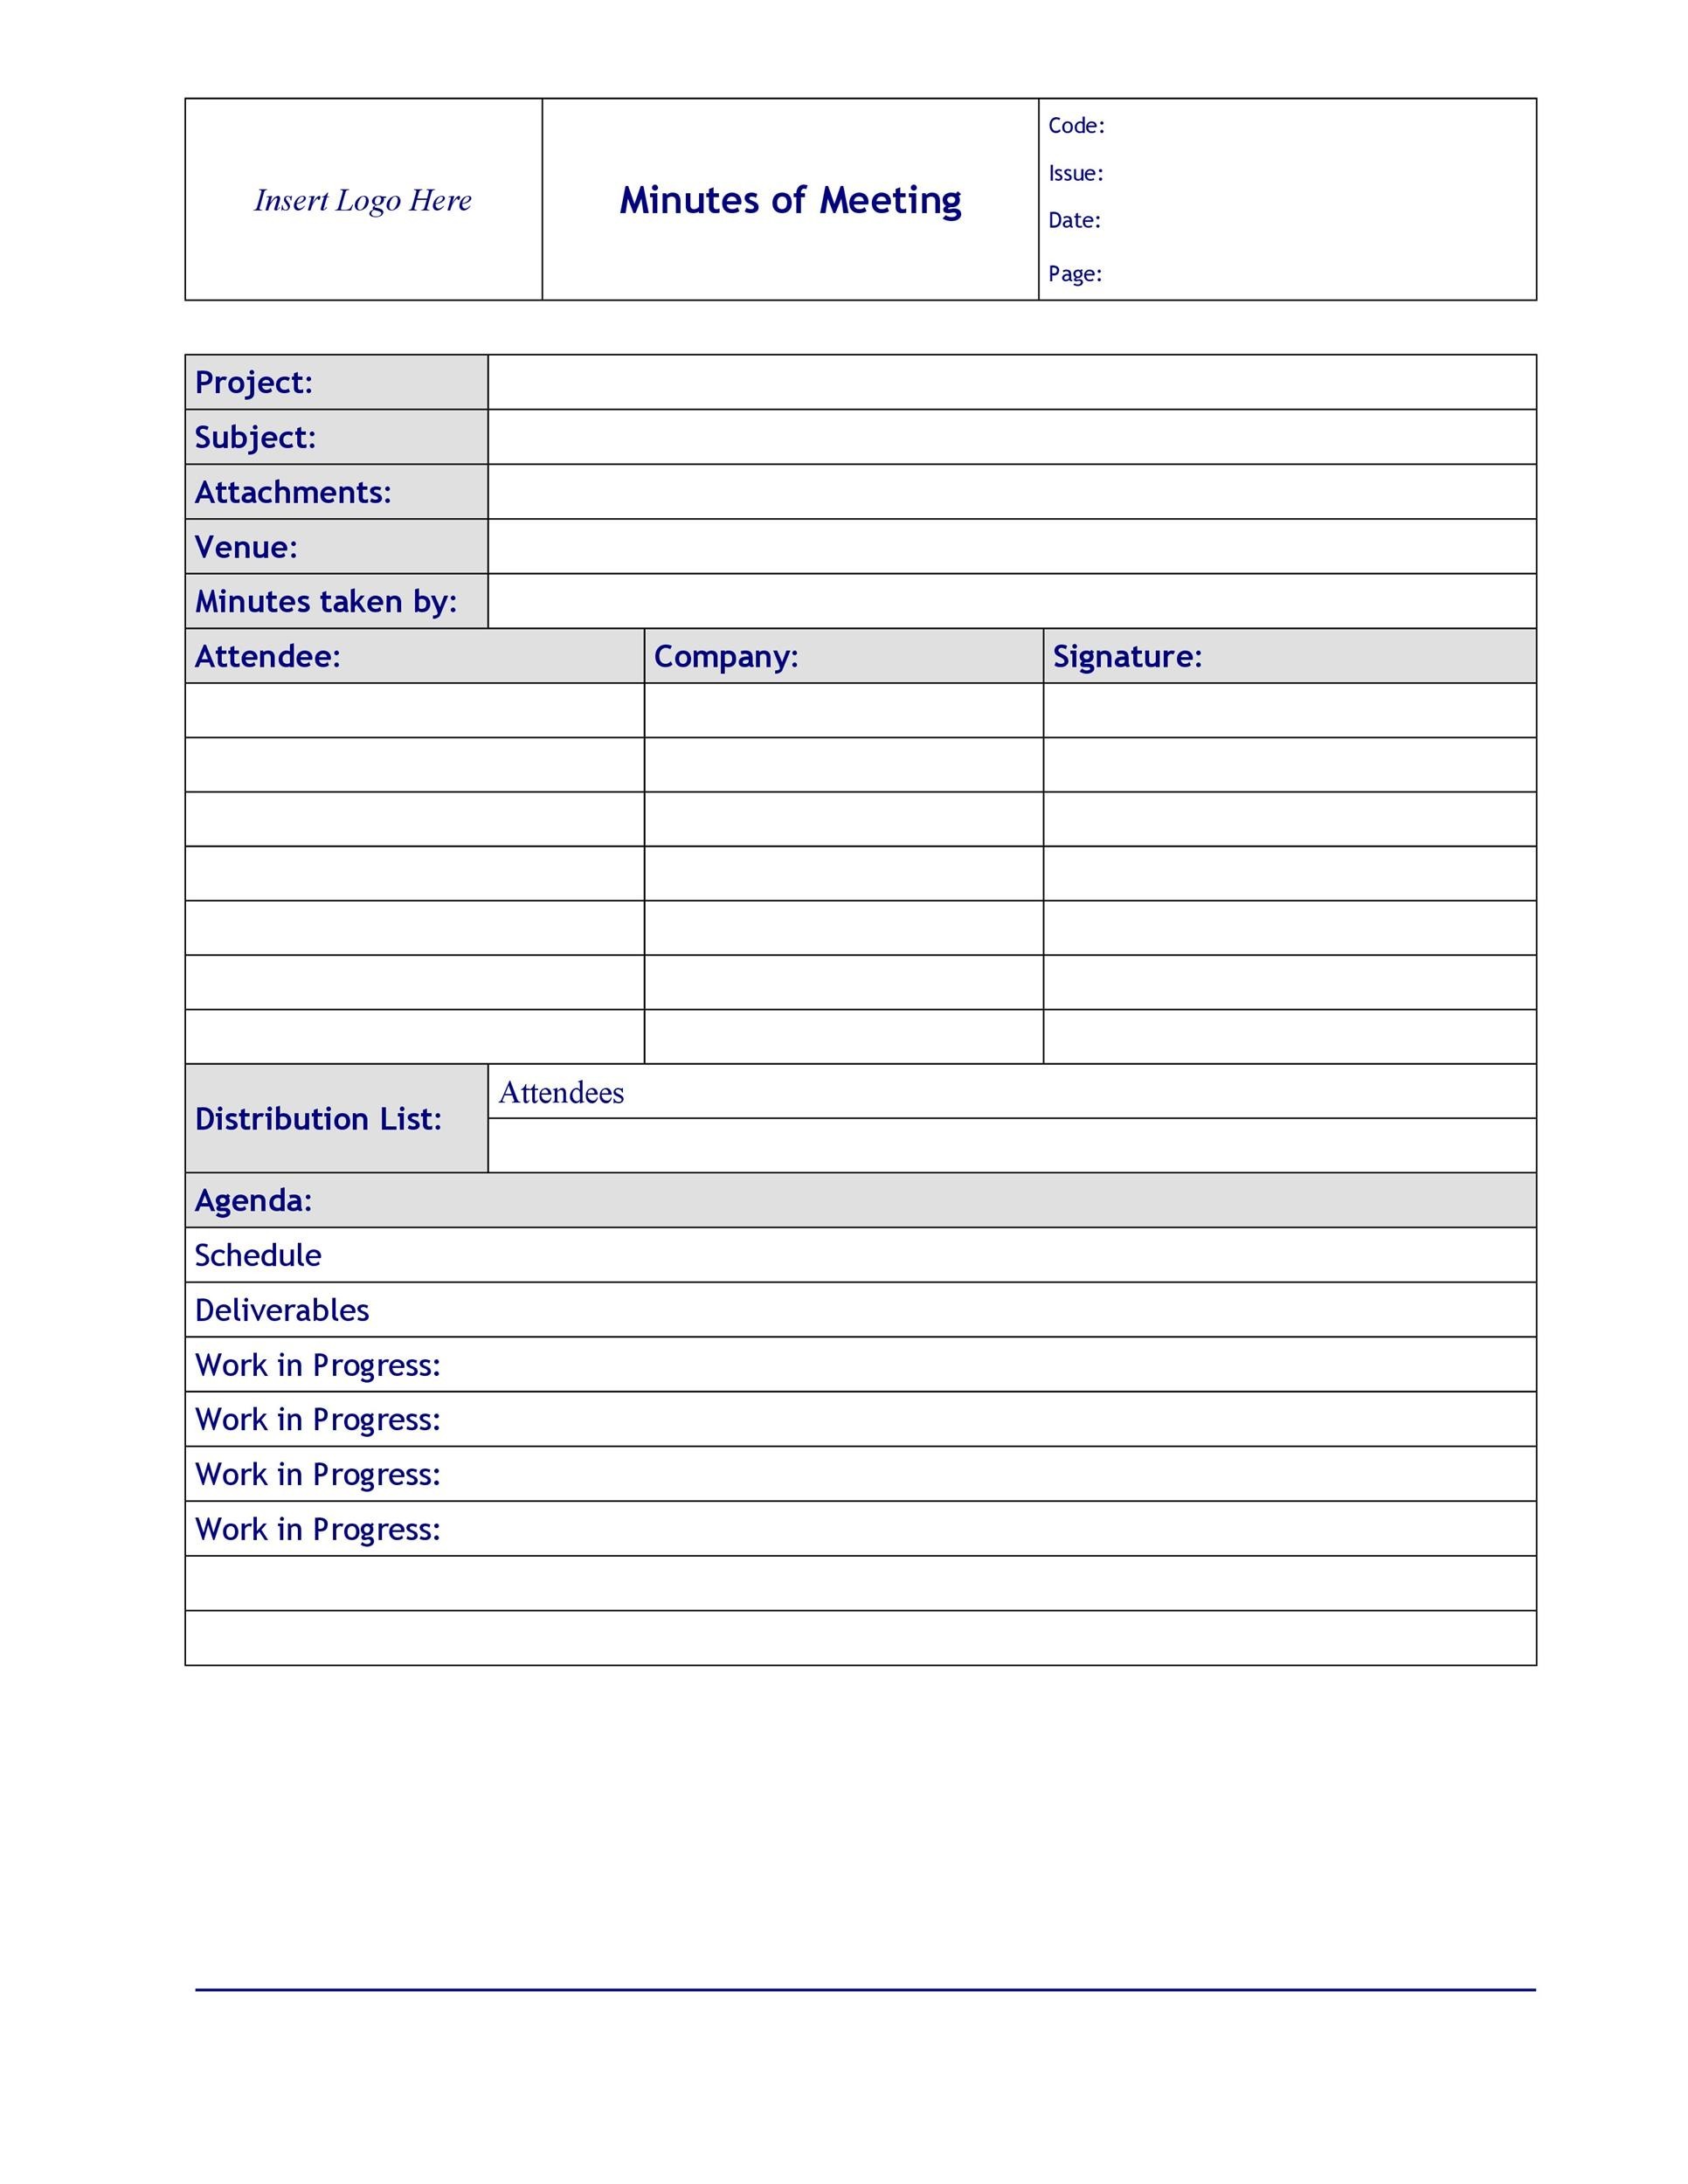 20 Handy Meeting Minutes & Meeting Notes Templates